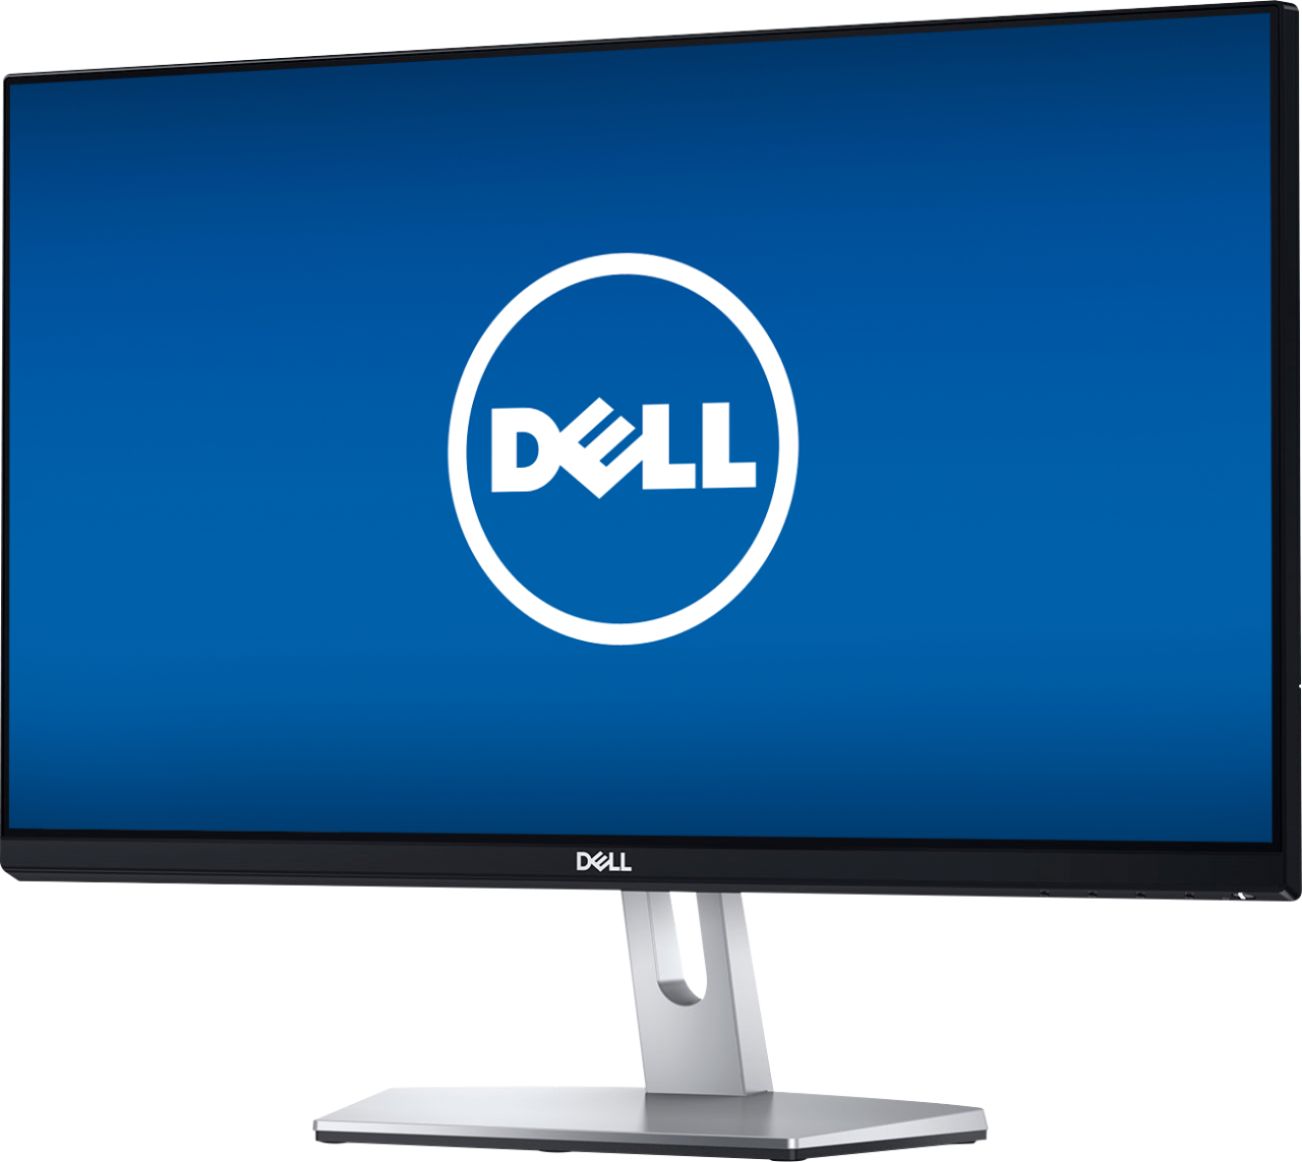 Left View: Dell - Geek Squad Certified Refurbished 23" IPS LED FHD Monitor - Black/Silver